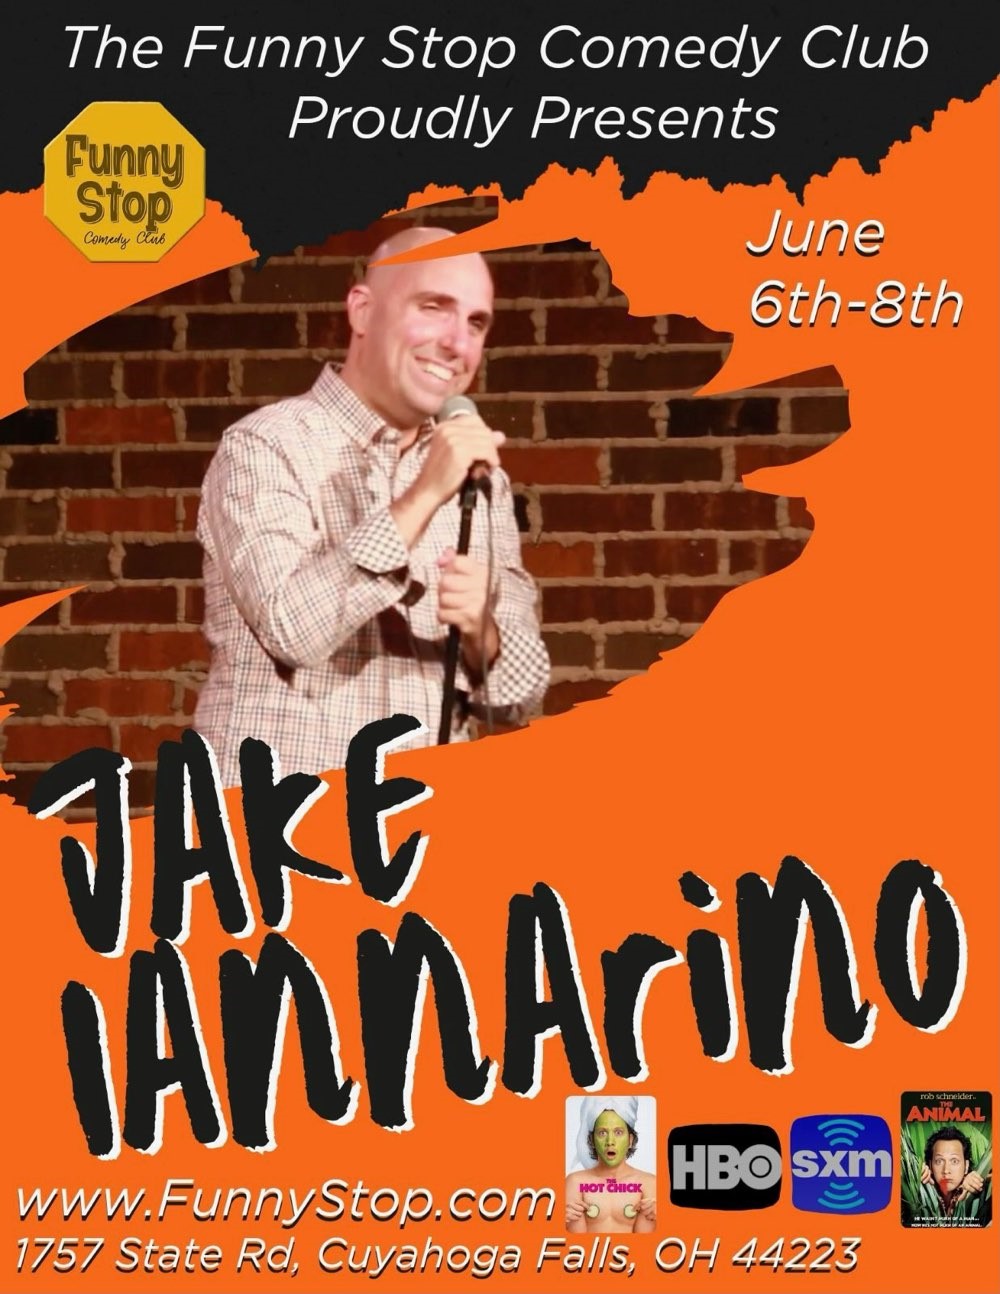 Jake Iannarino - Sat. 9:30PM Show Funny Stop Comedy Club on juin 08, 21:30@Funny Stop Comedy Club - Achetez des billets et obtenez des informations surFunny Stop funnystop.online